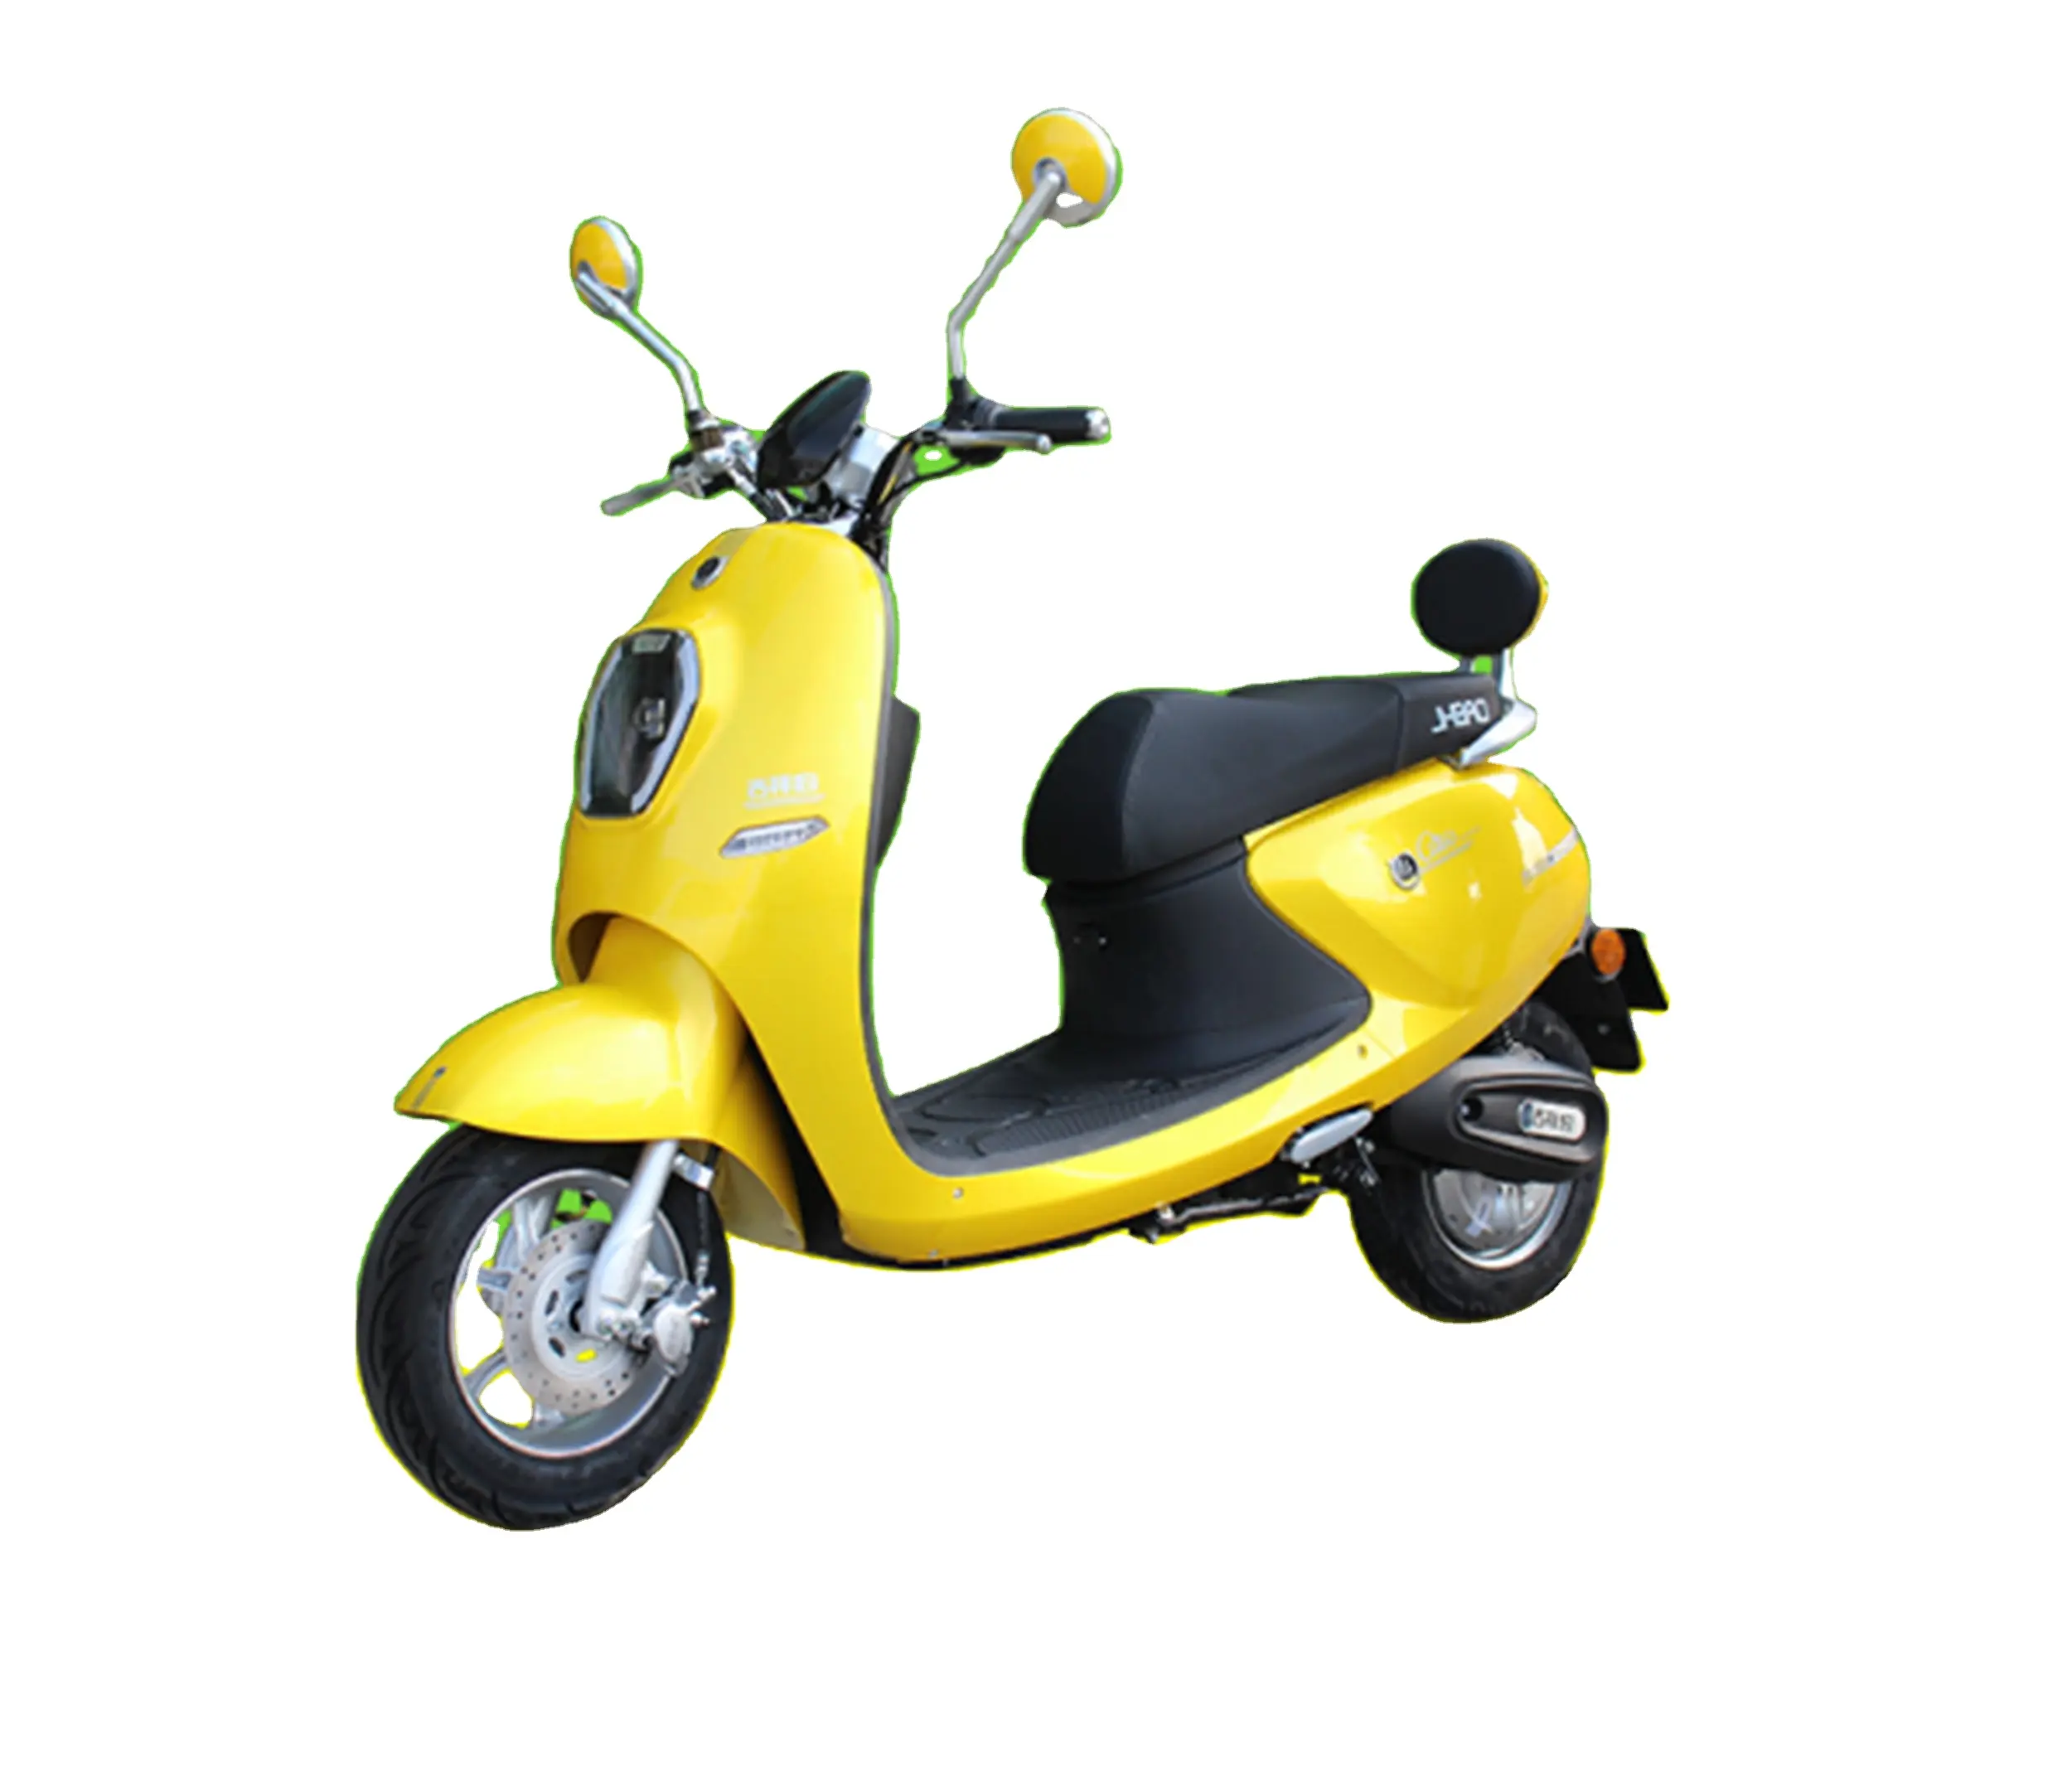 new model E-scooter 2 wheel electrical motorcycle new model electric motorbike made in China